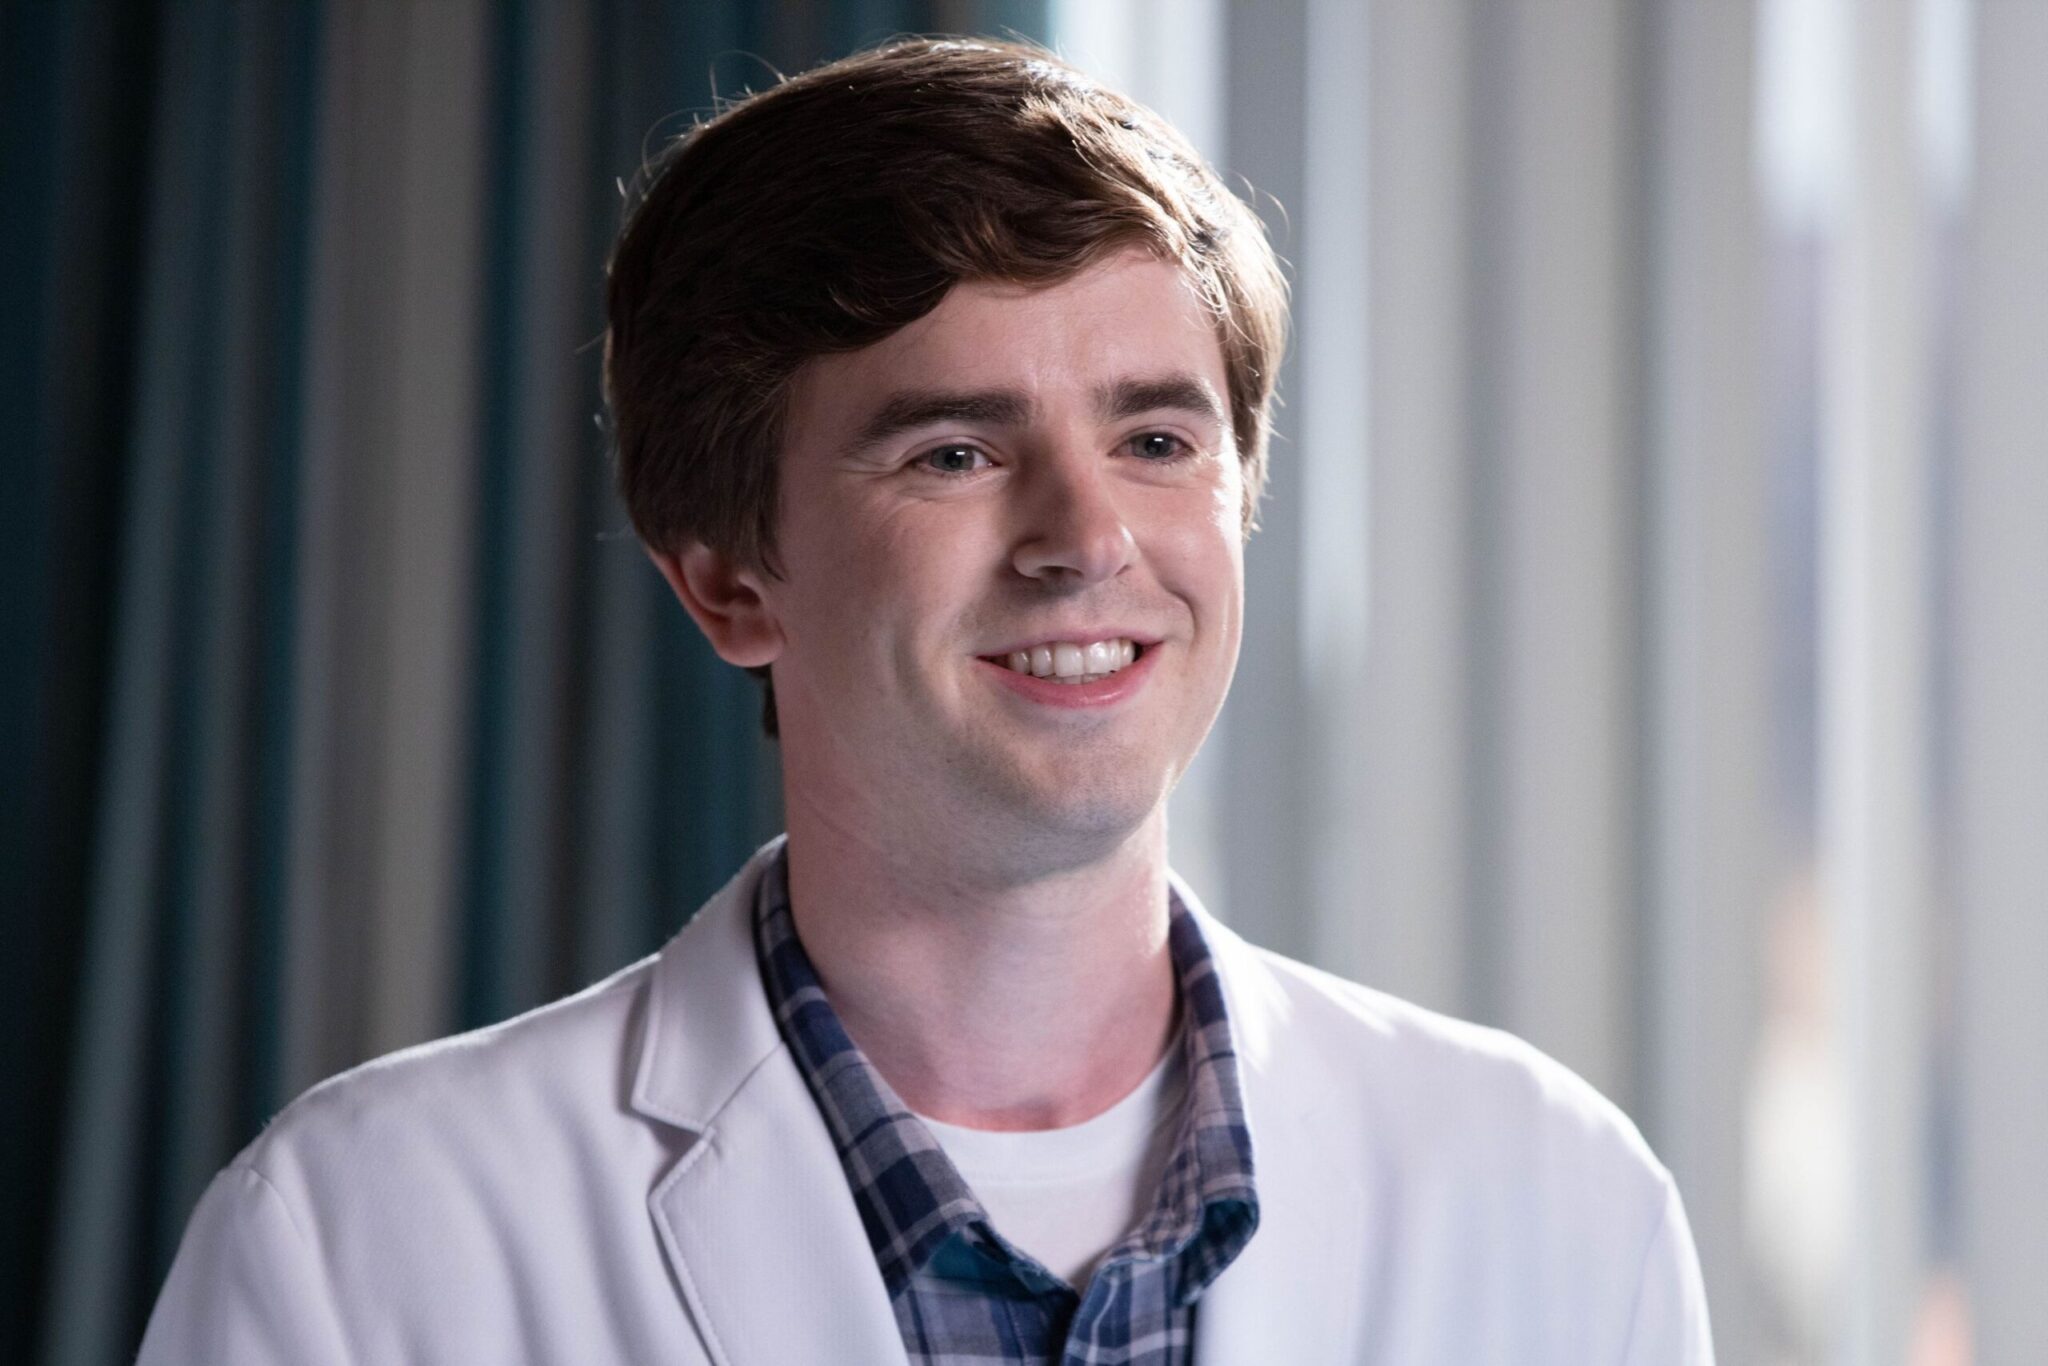 ABC’s Medical Drama “The Good Doctor” Canceled After Seven Seasons